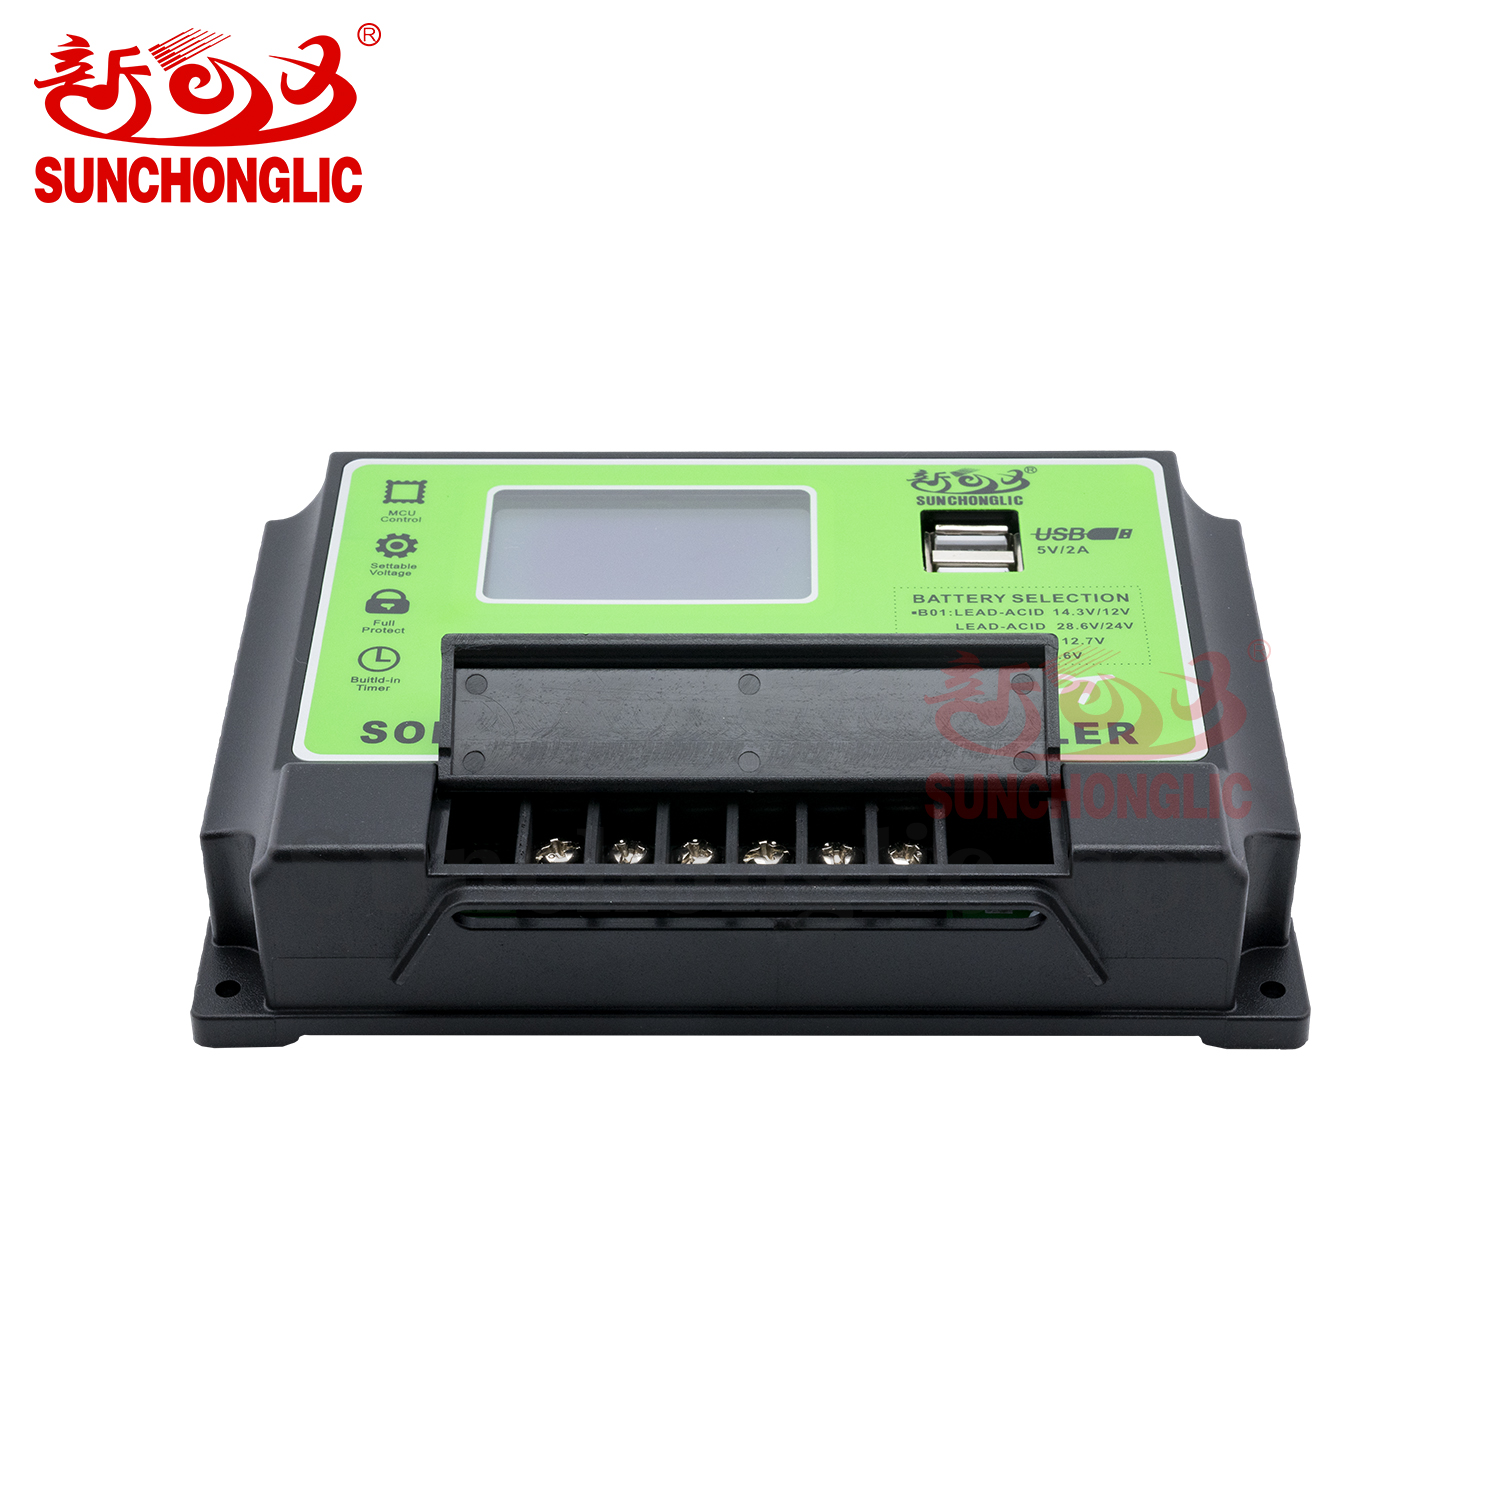 Solar Charge Controller - FT-M1250